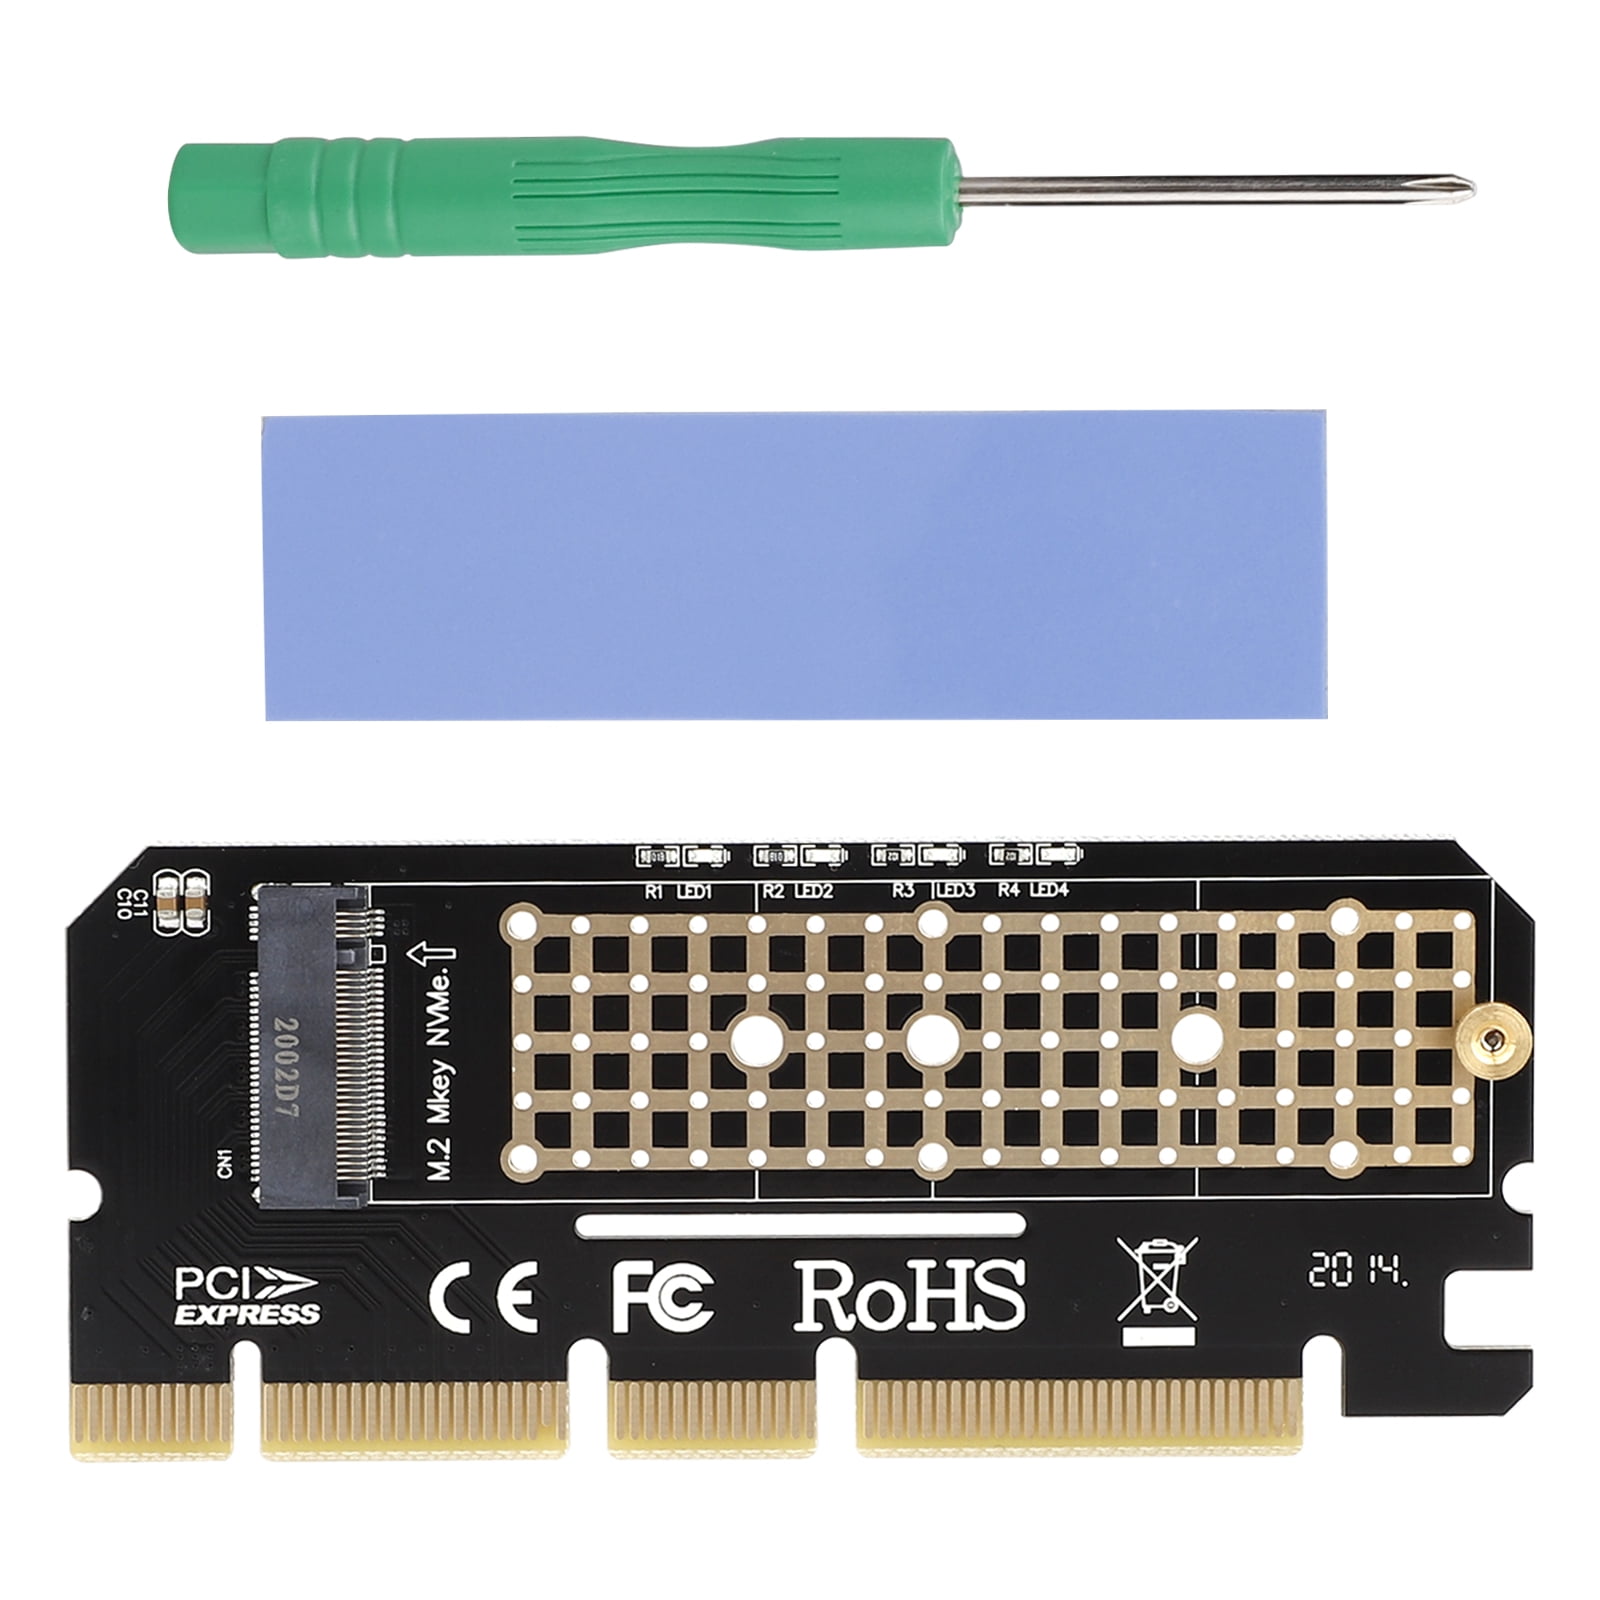 In The Lab: Netstor NP631N M.2 NVMe to PCIe Host Adapter 